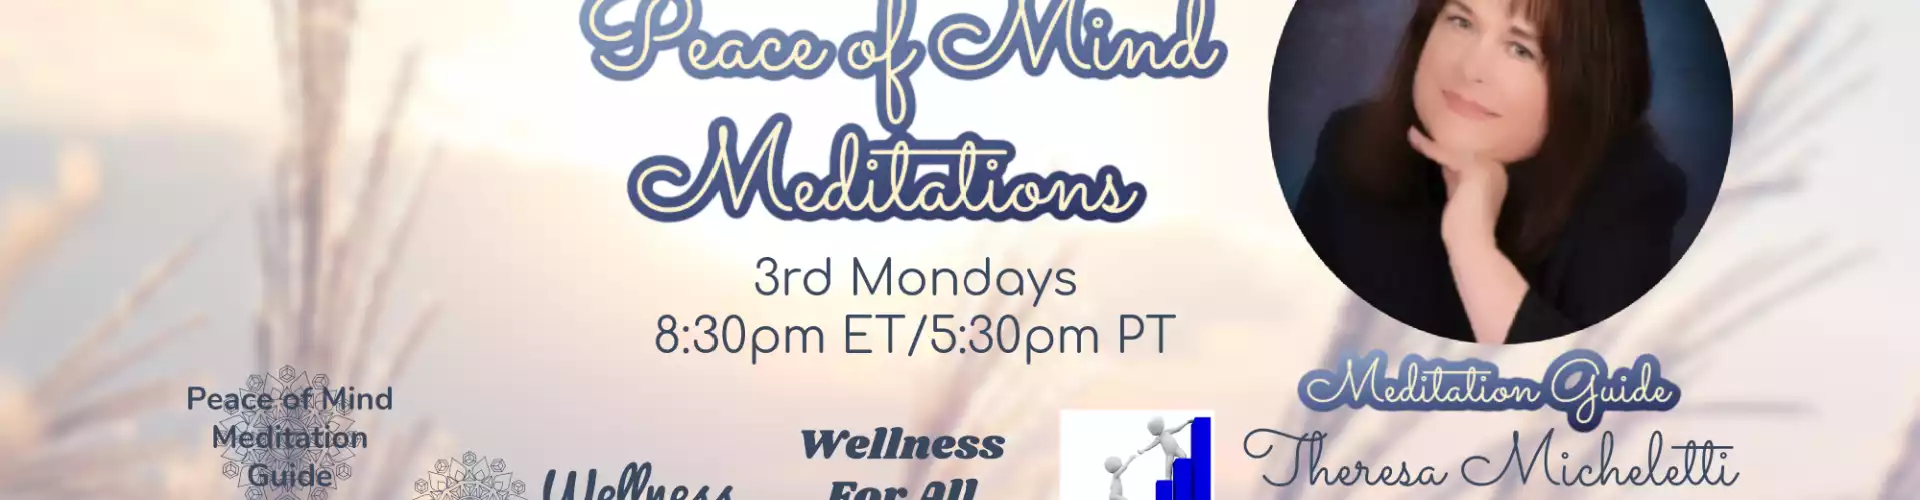 Peace of Mind Meditations with WU Expert Theresa Micheletti